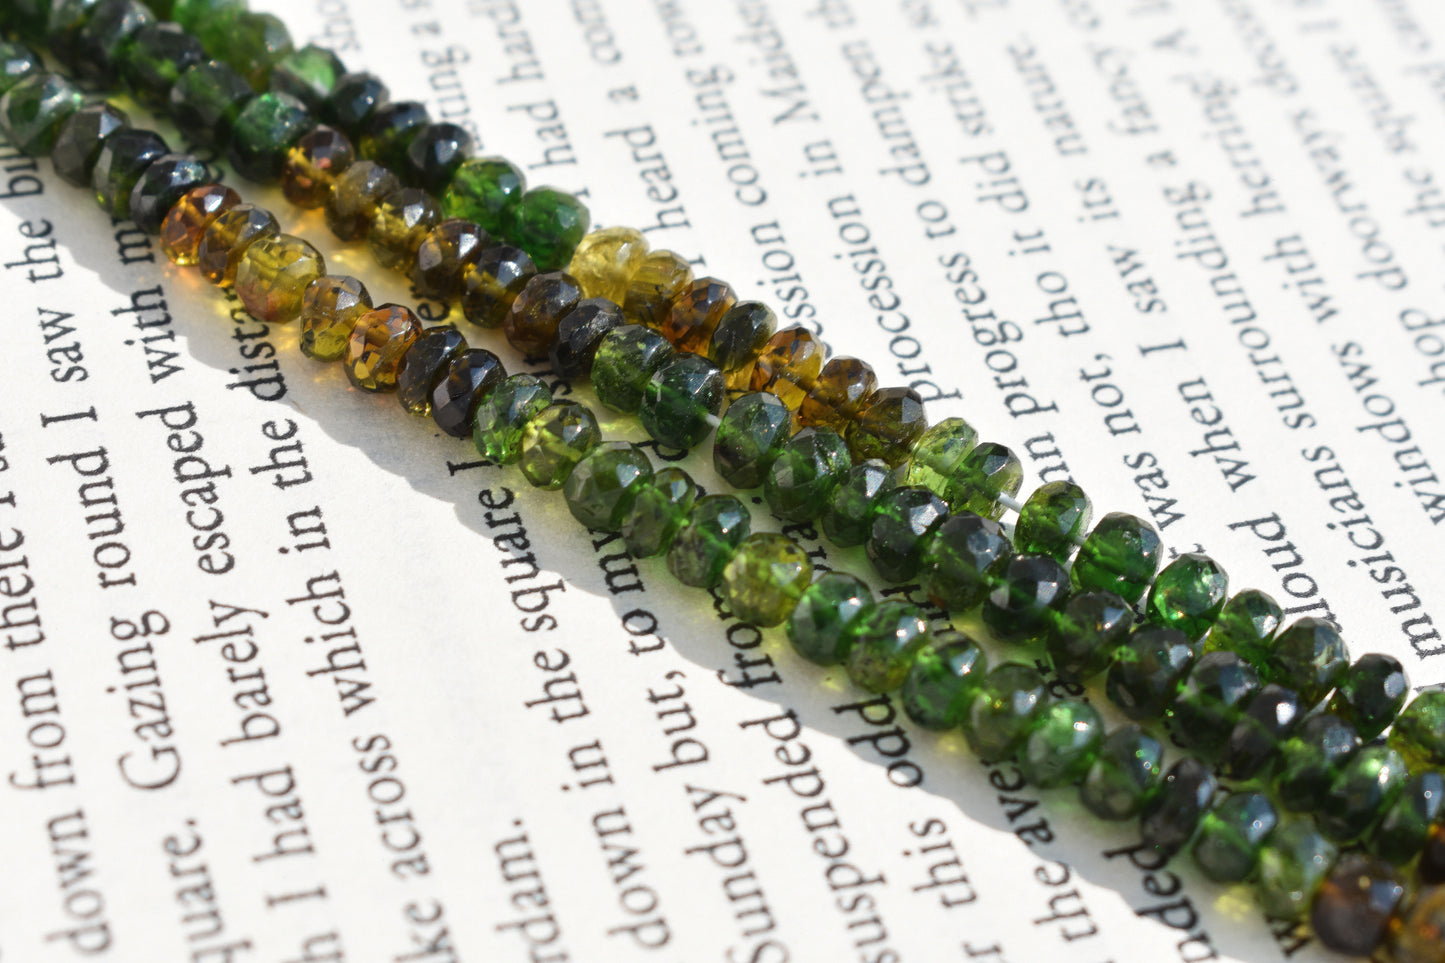 Tourmaline Rondelle Faceted Beads in Green & Olive